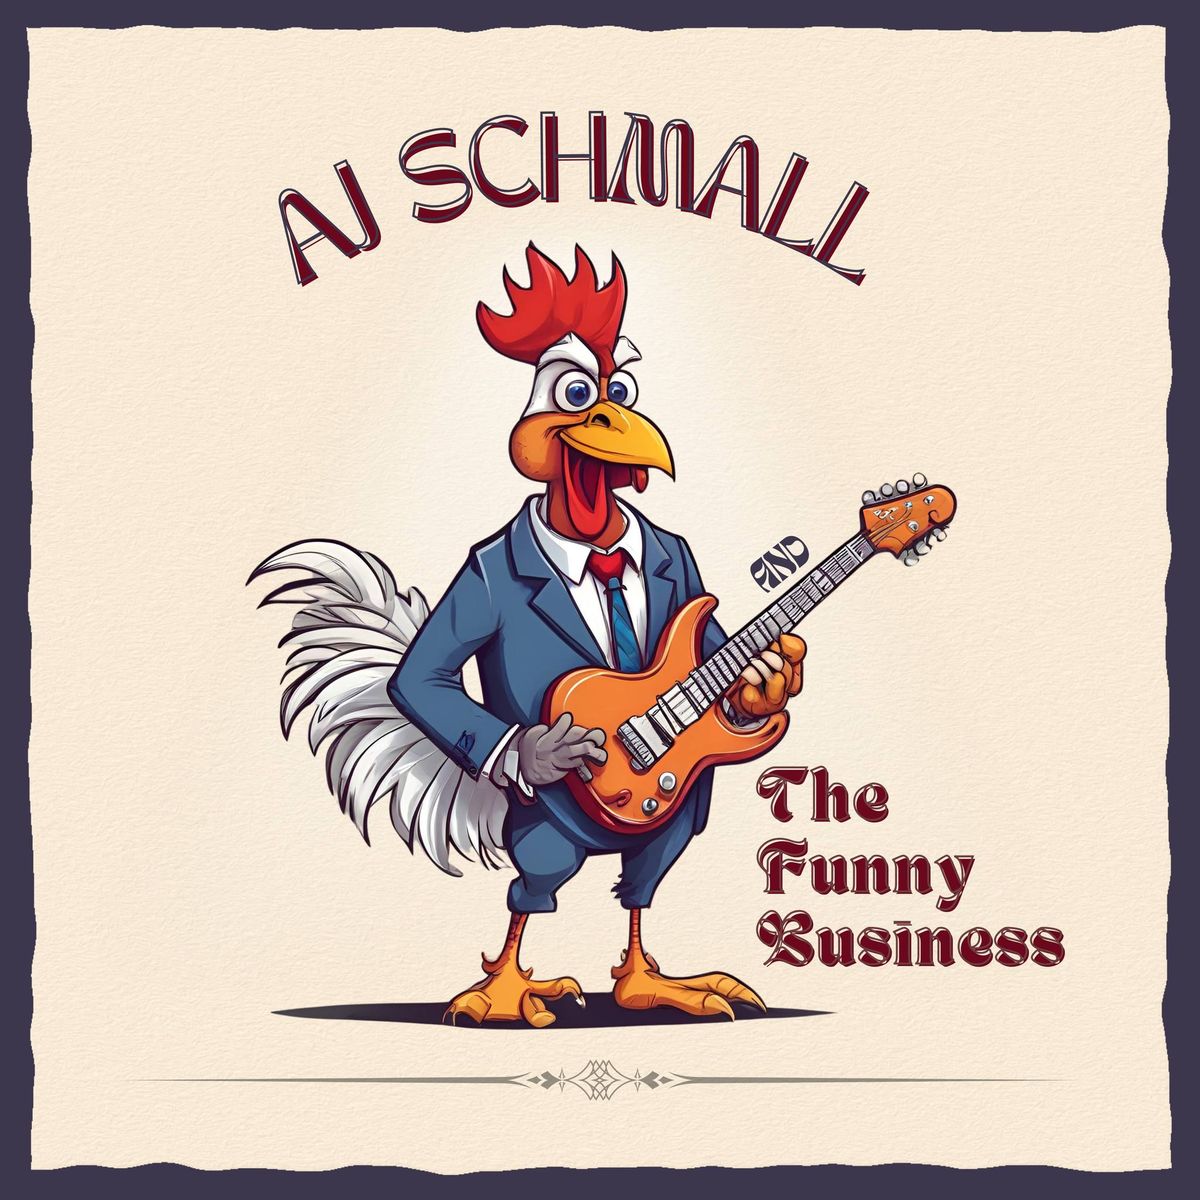 AJ Schmall & The Funny Business at Oliver's in the Heights | Peoria Heights, IL